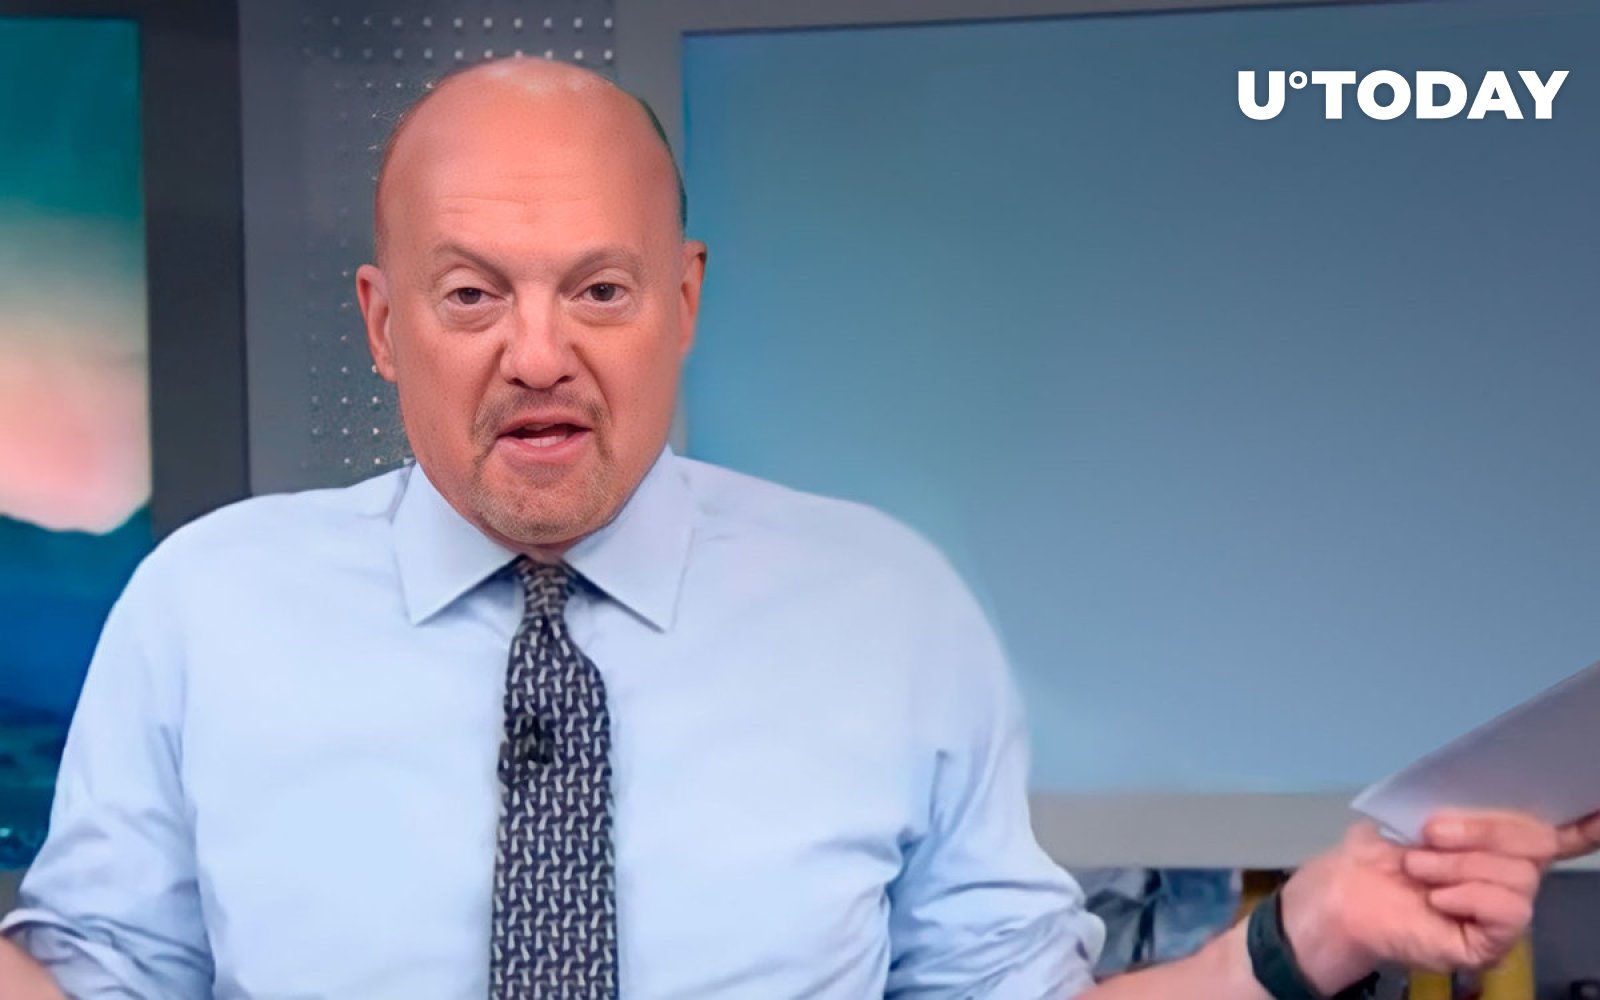 Jim Cramer Tweets About Crypto, But The Community Doesn’t Find It Weird